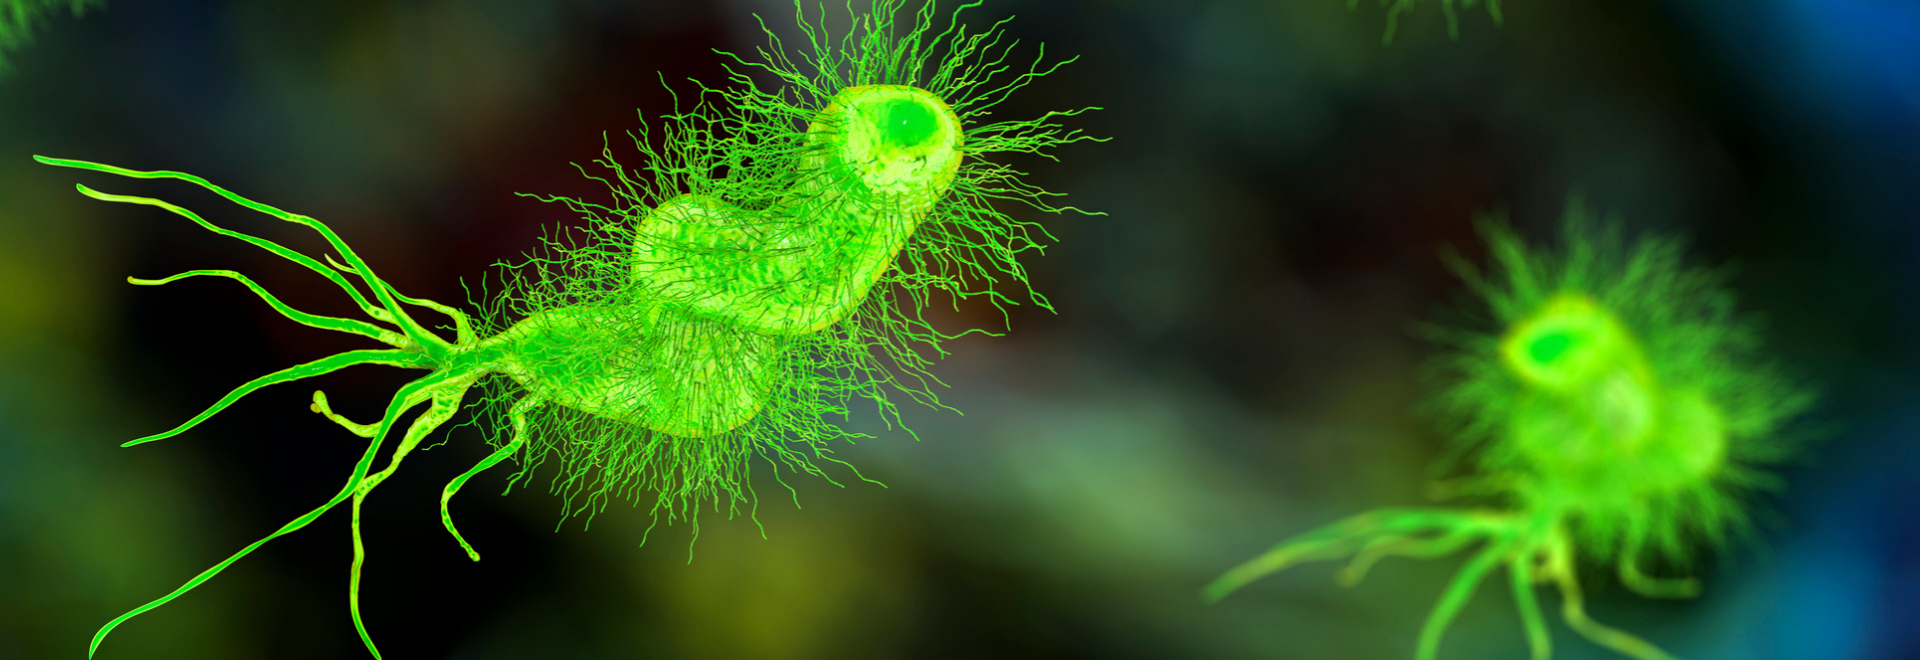 helicobacter-pylori-infection-causes-symptoms-treatment